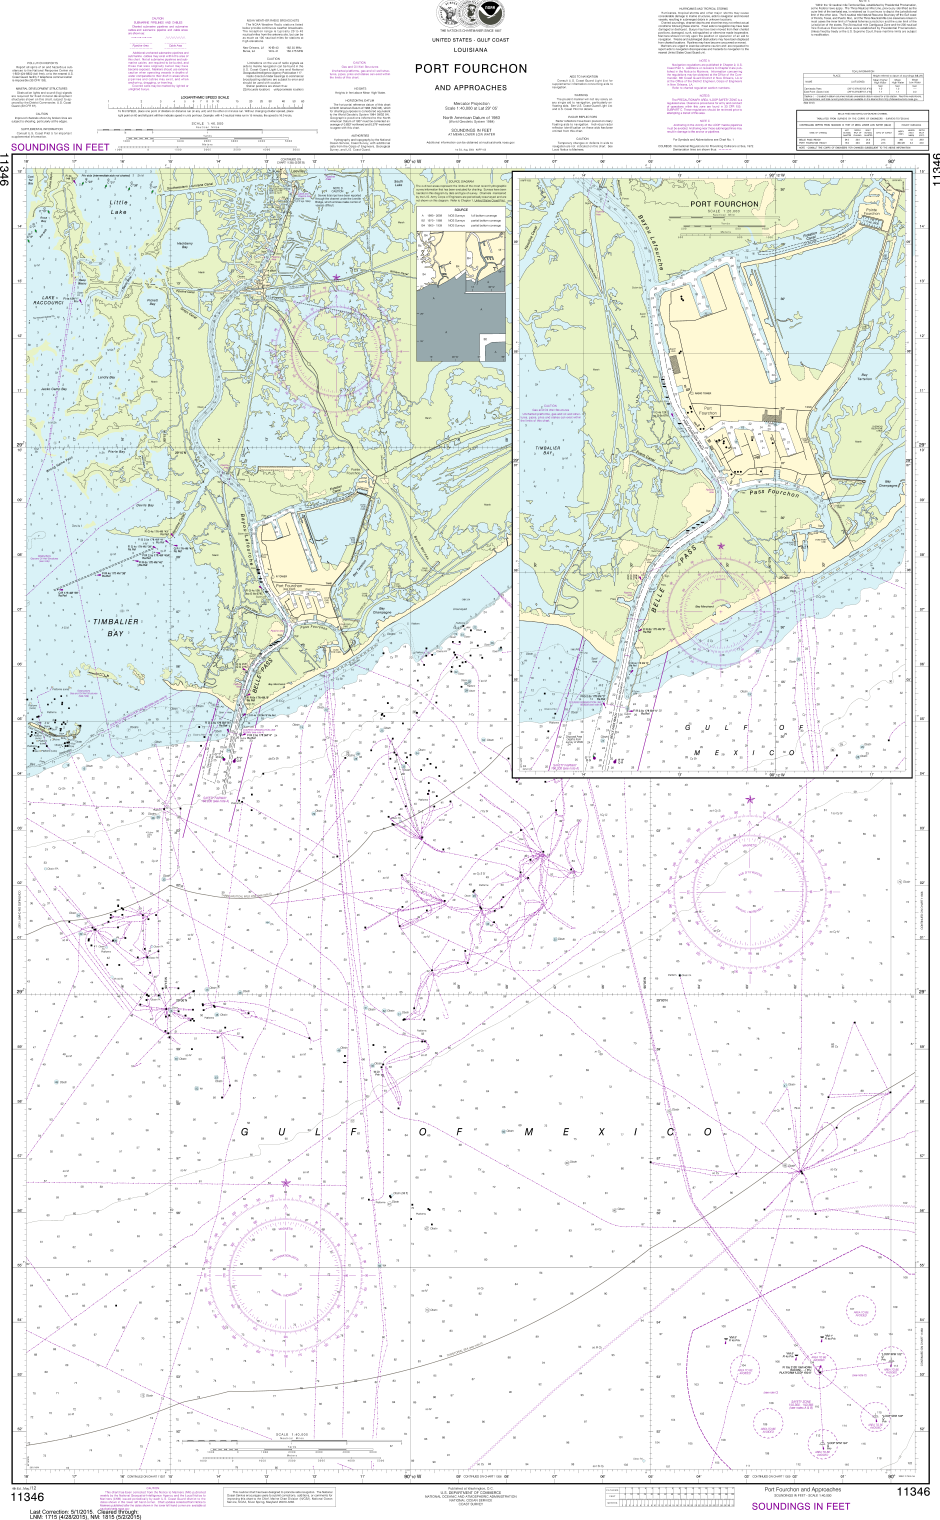 NOAA Print-on-Demand Charts US Waters-Port Fourchon and Approaches-11346